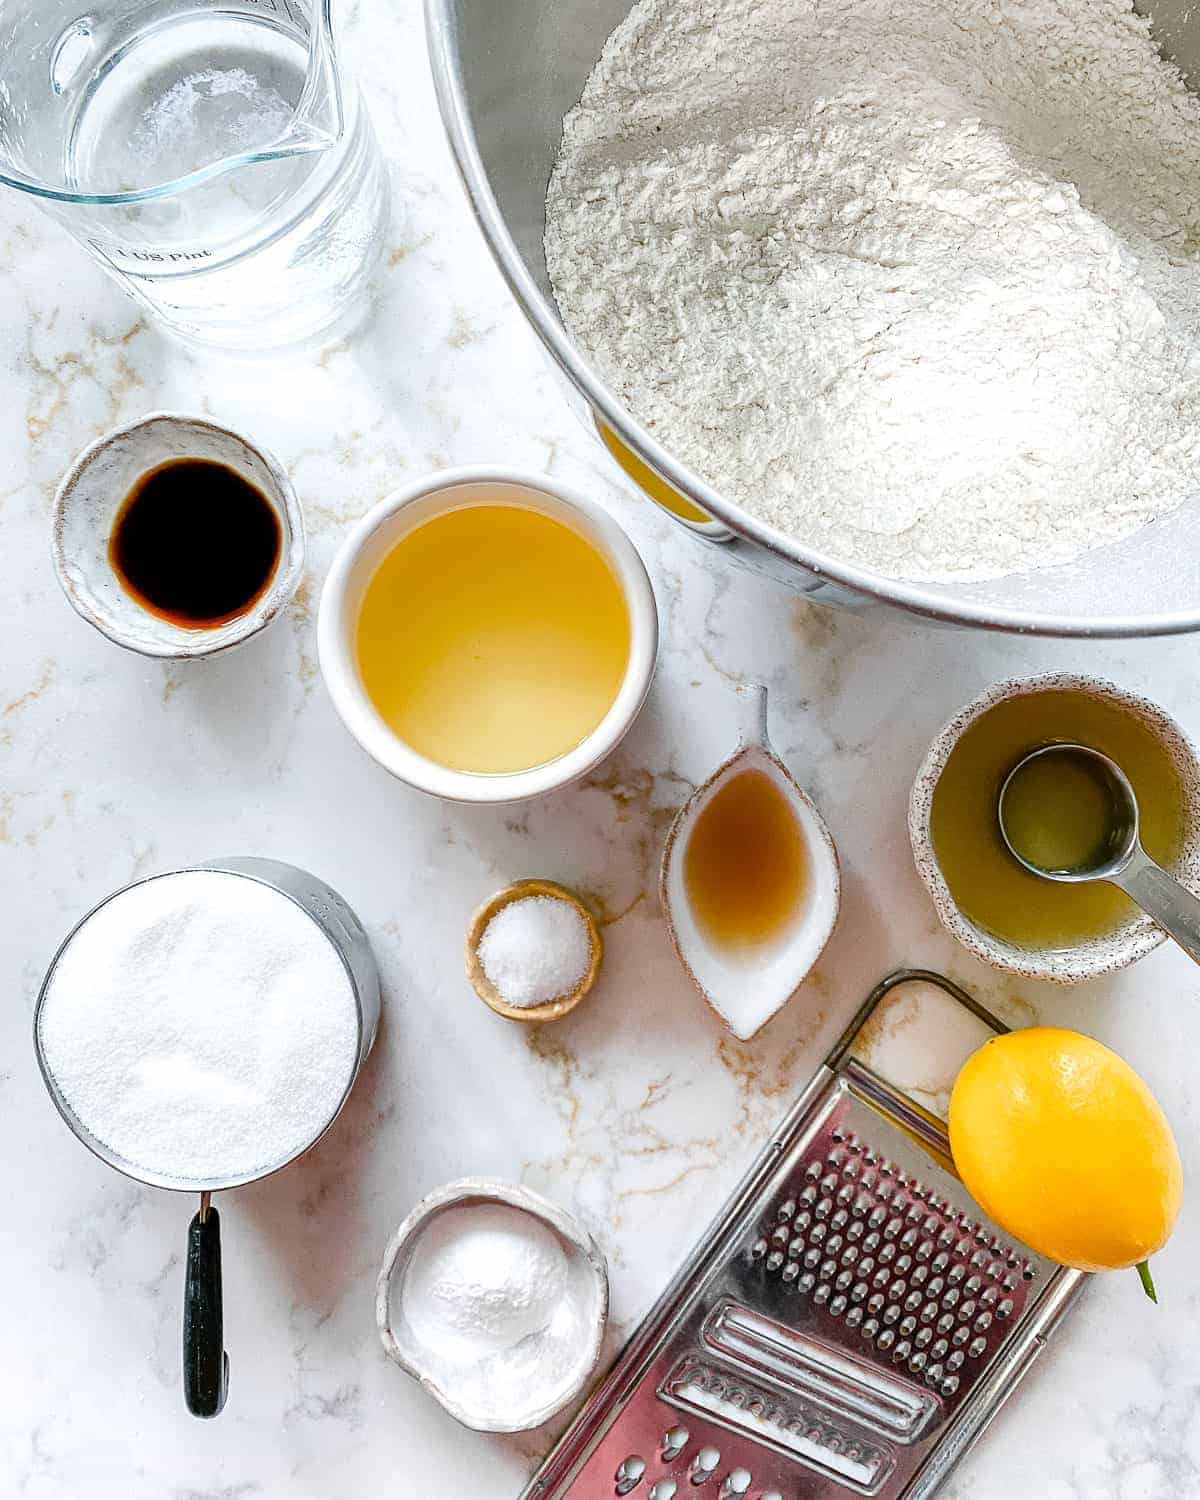 ingredients for Lemon Loaf measured out against a white background